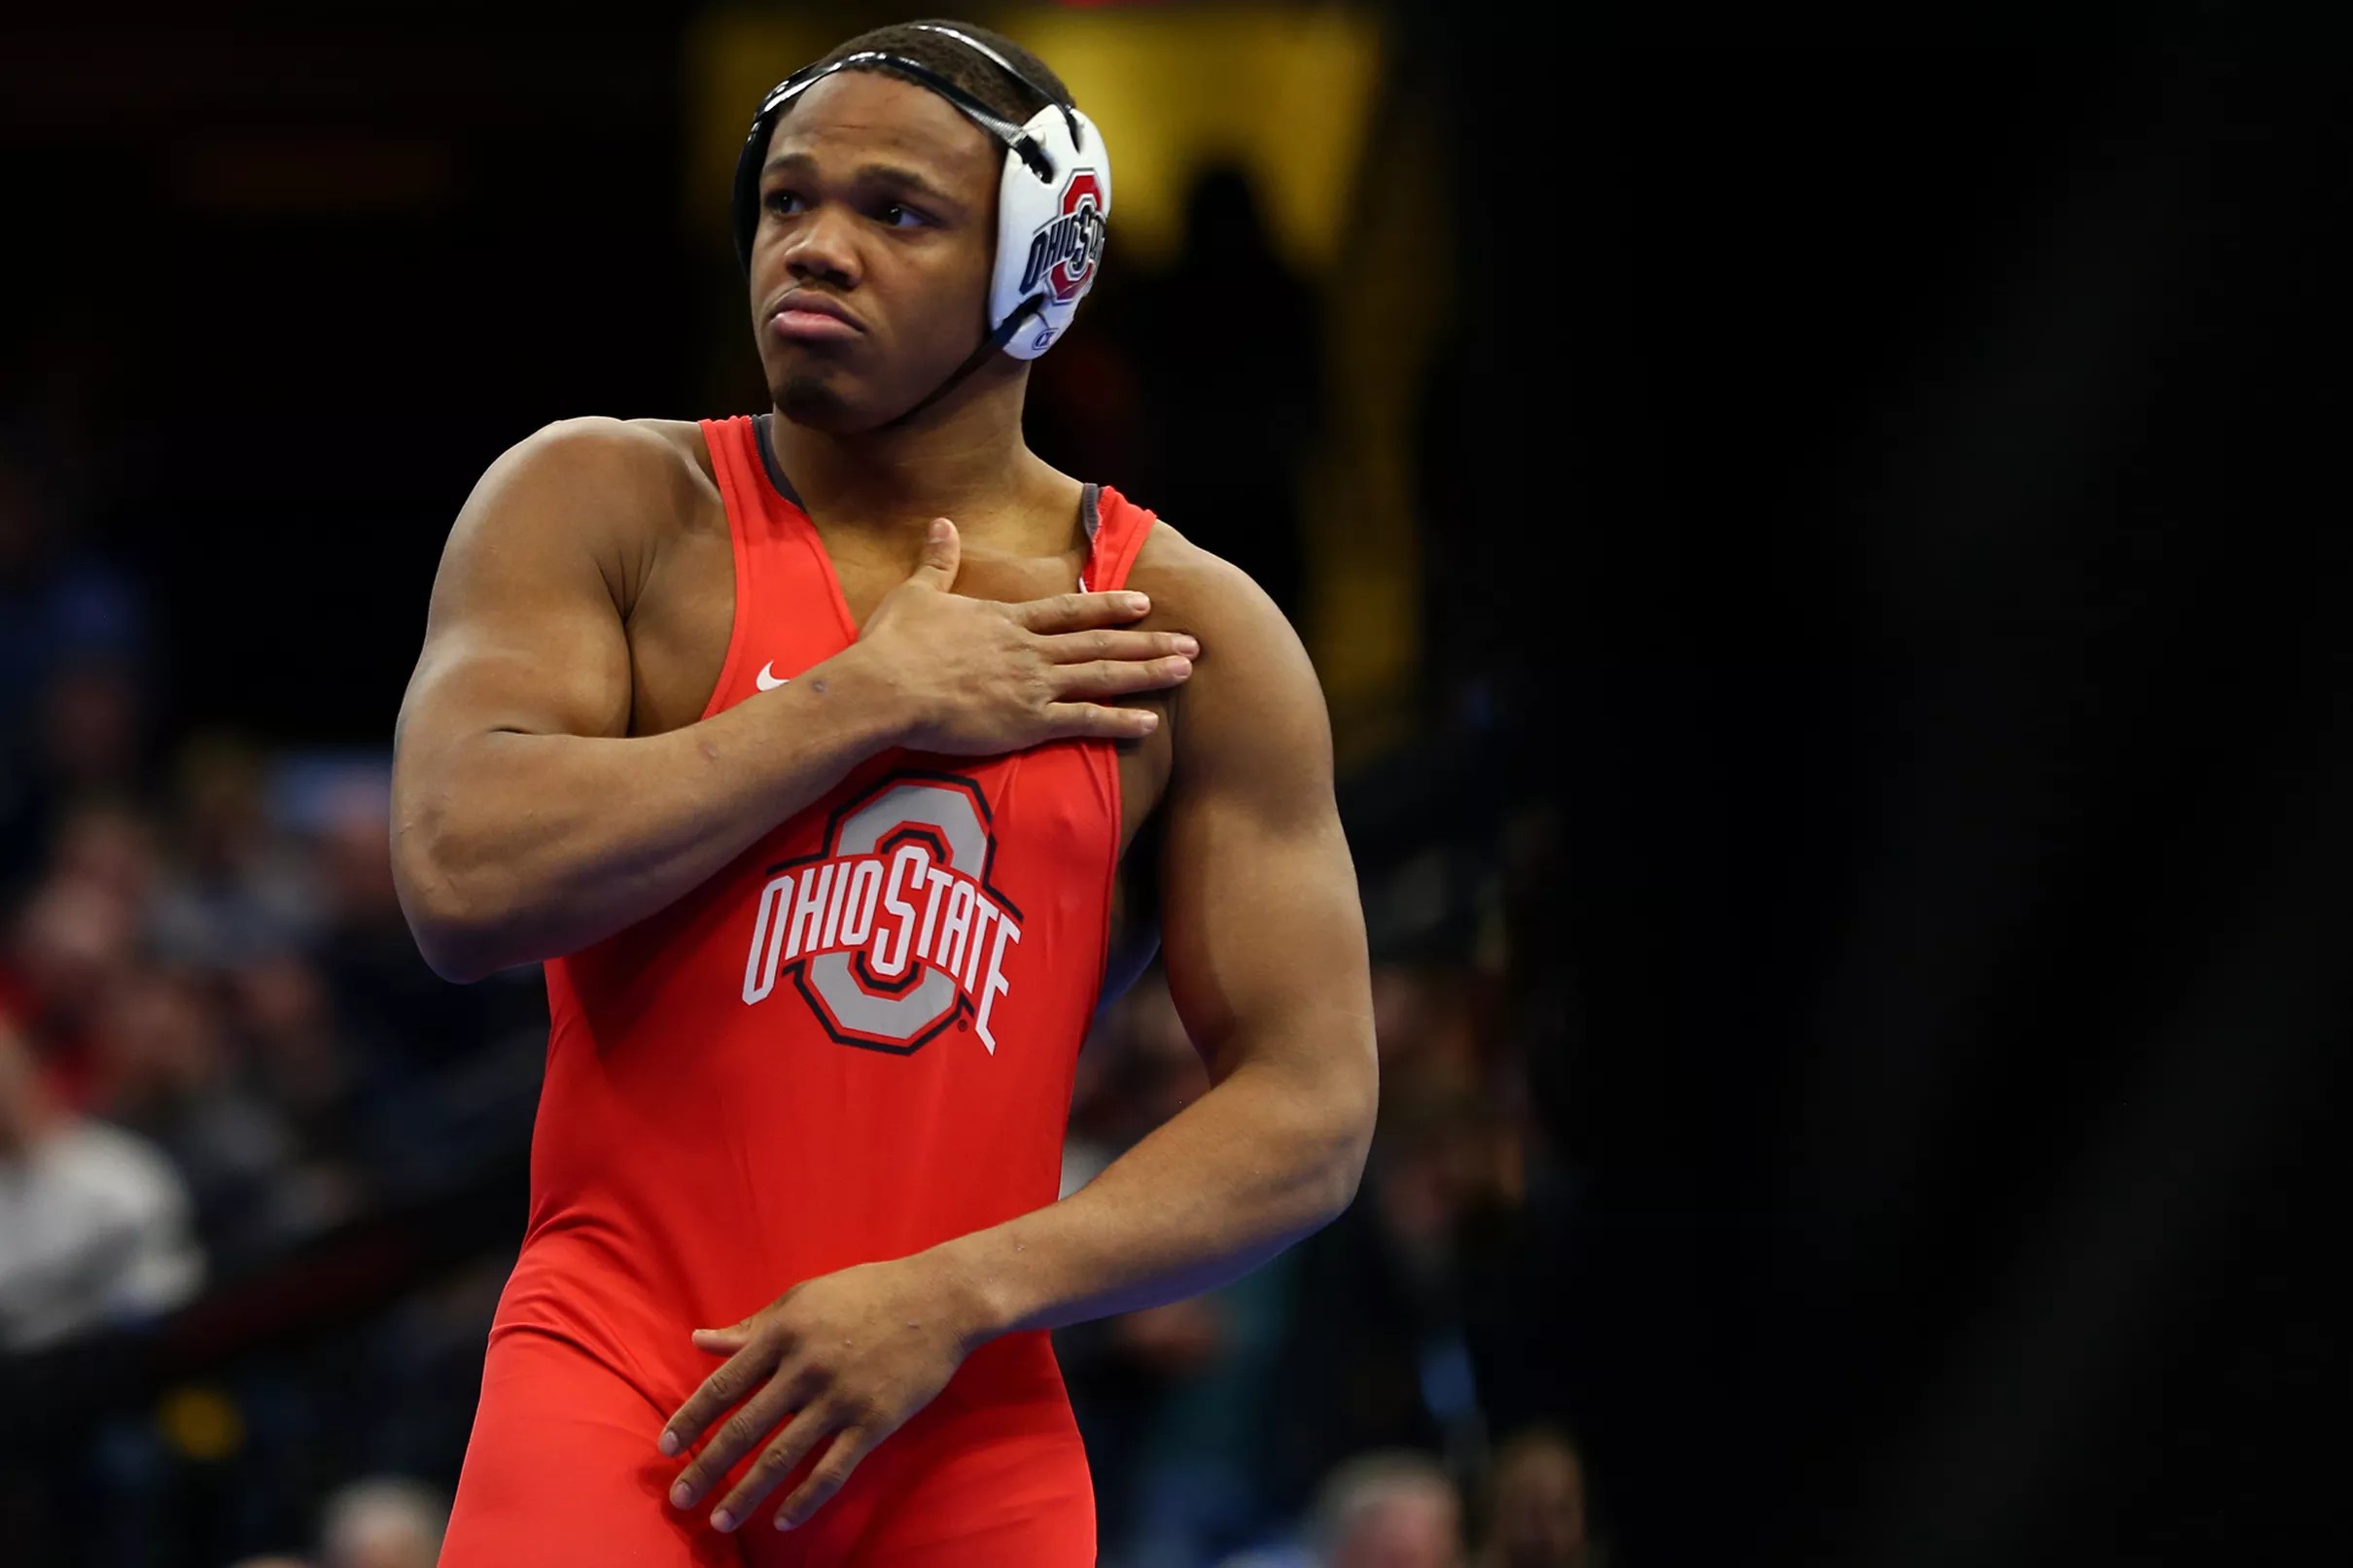 Ohio State wrestling is ready to take to the mat as one of the nation’s